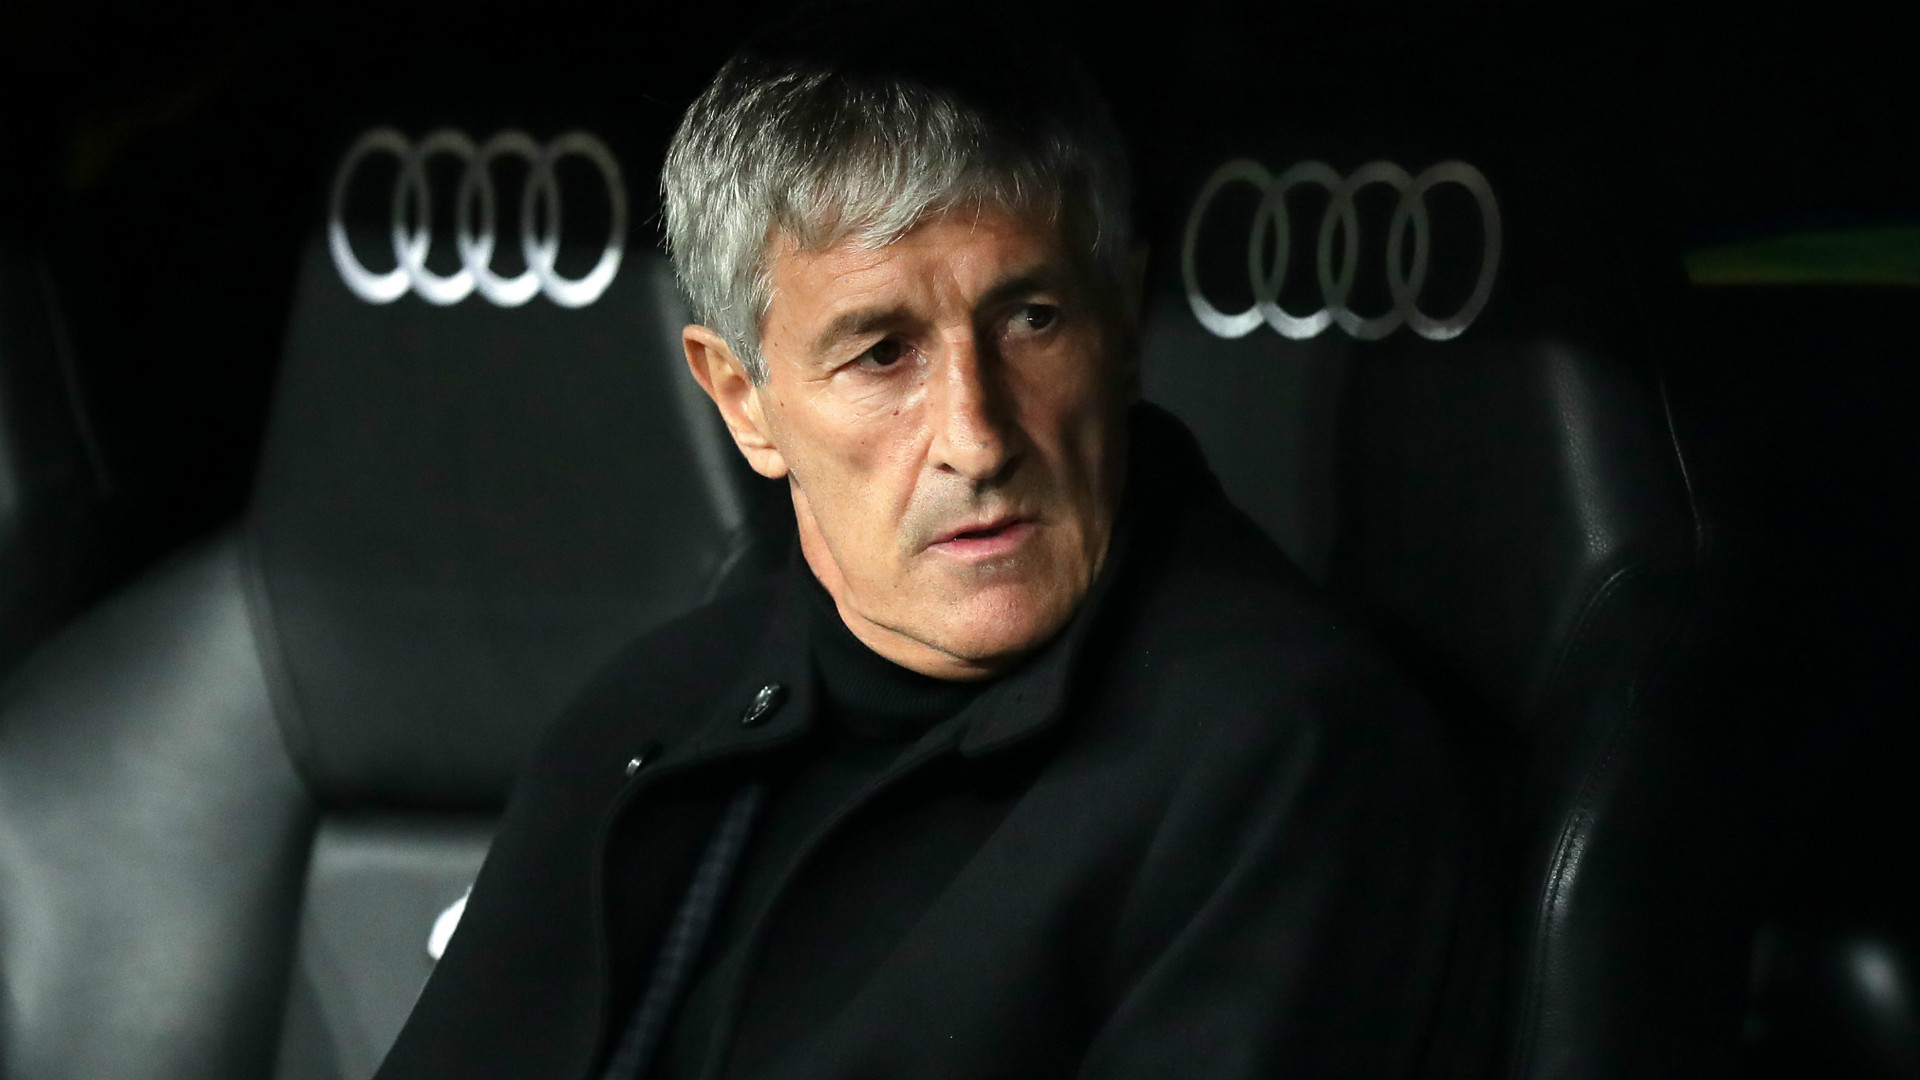 Setien was about to coach in Egypt when Barcelona approached him